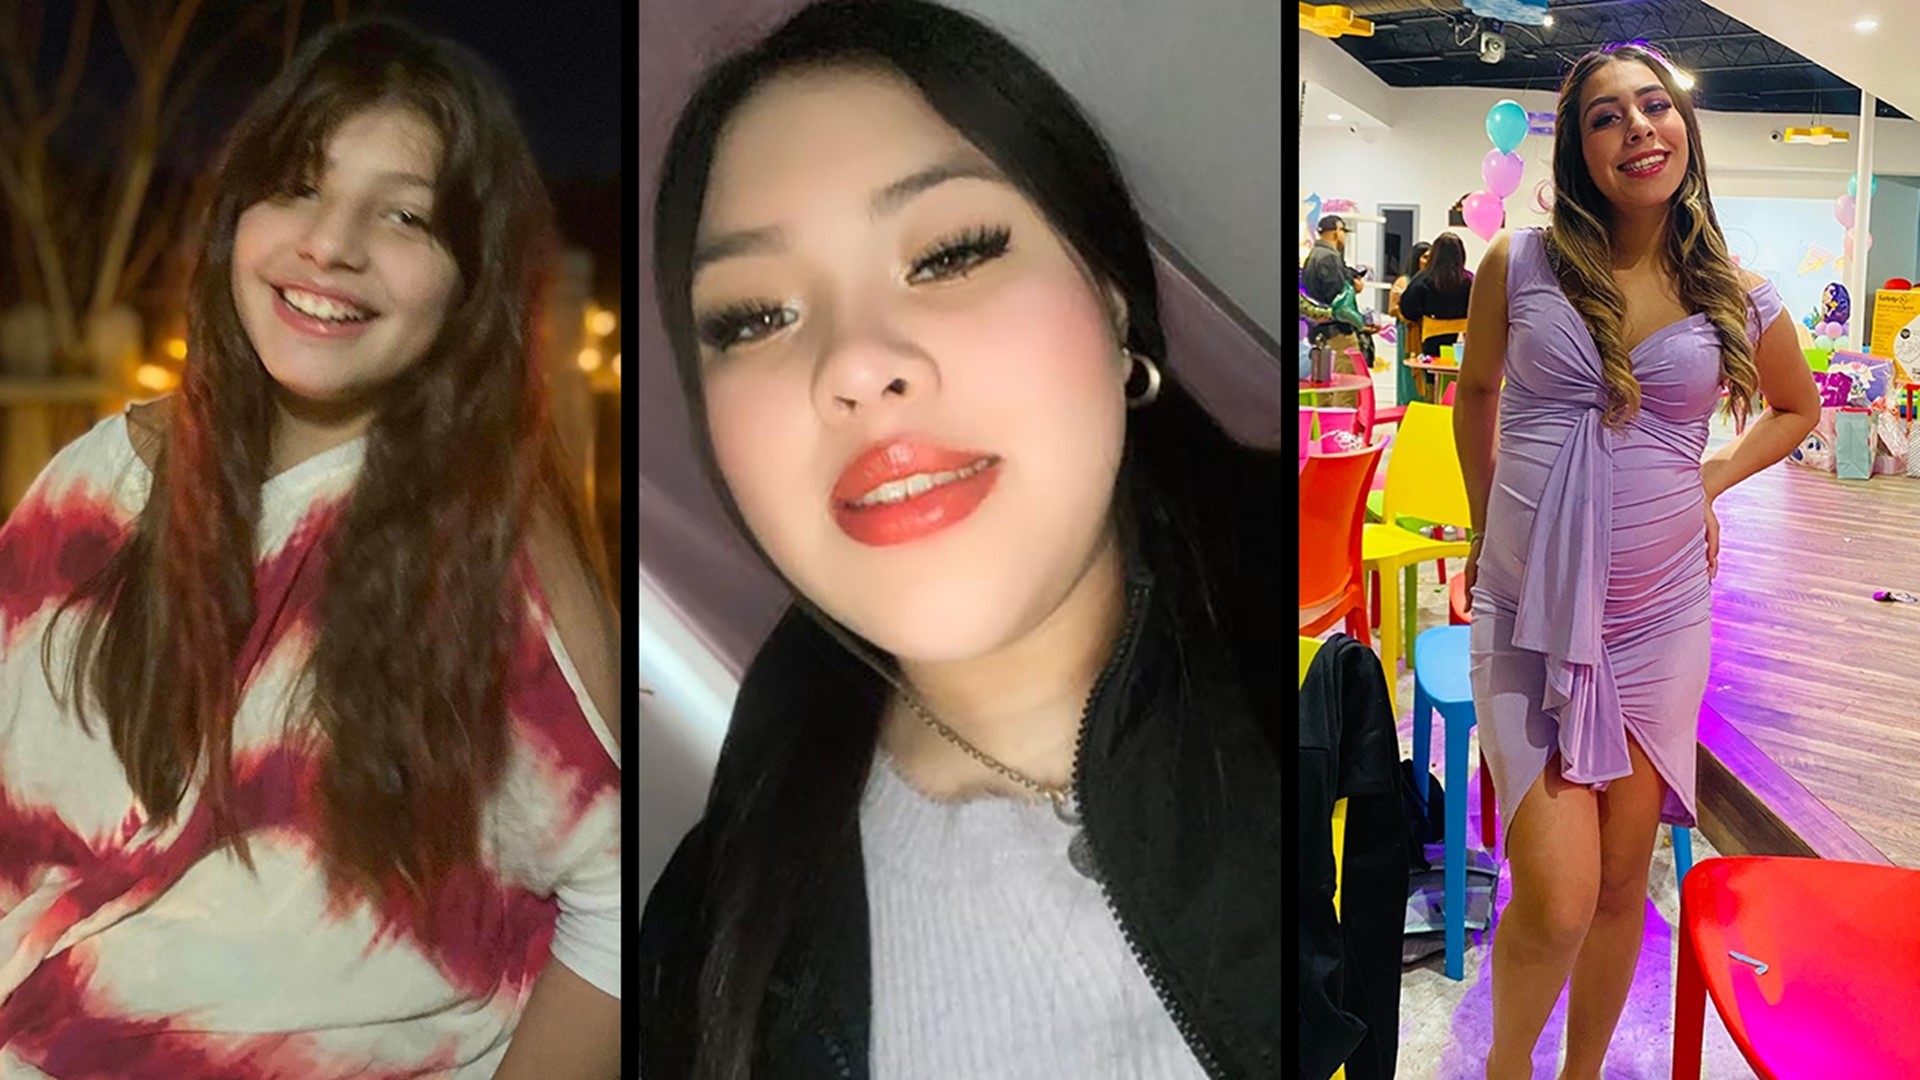 A woman's boyfriend killed two of her daughters and a family friend before killing himself last weekend at her Galena Park home, according to investigators.